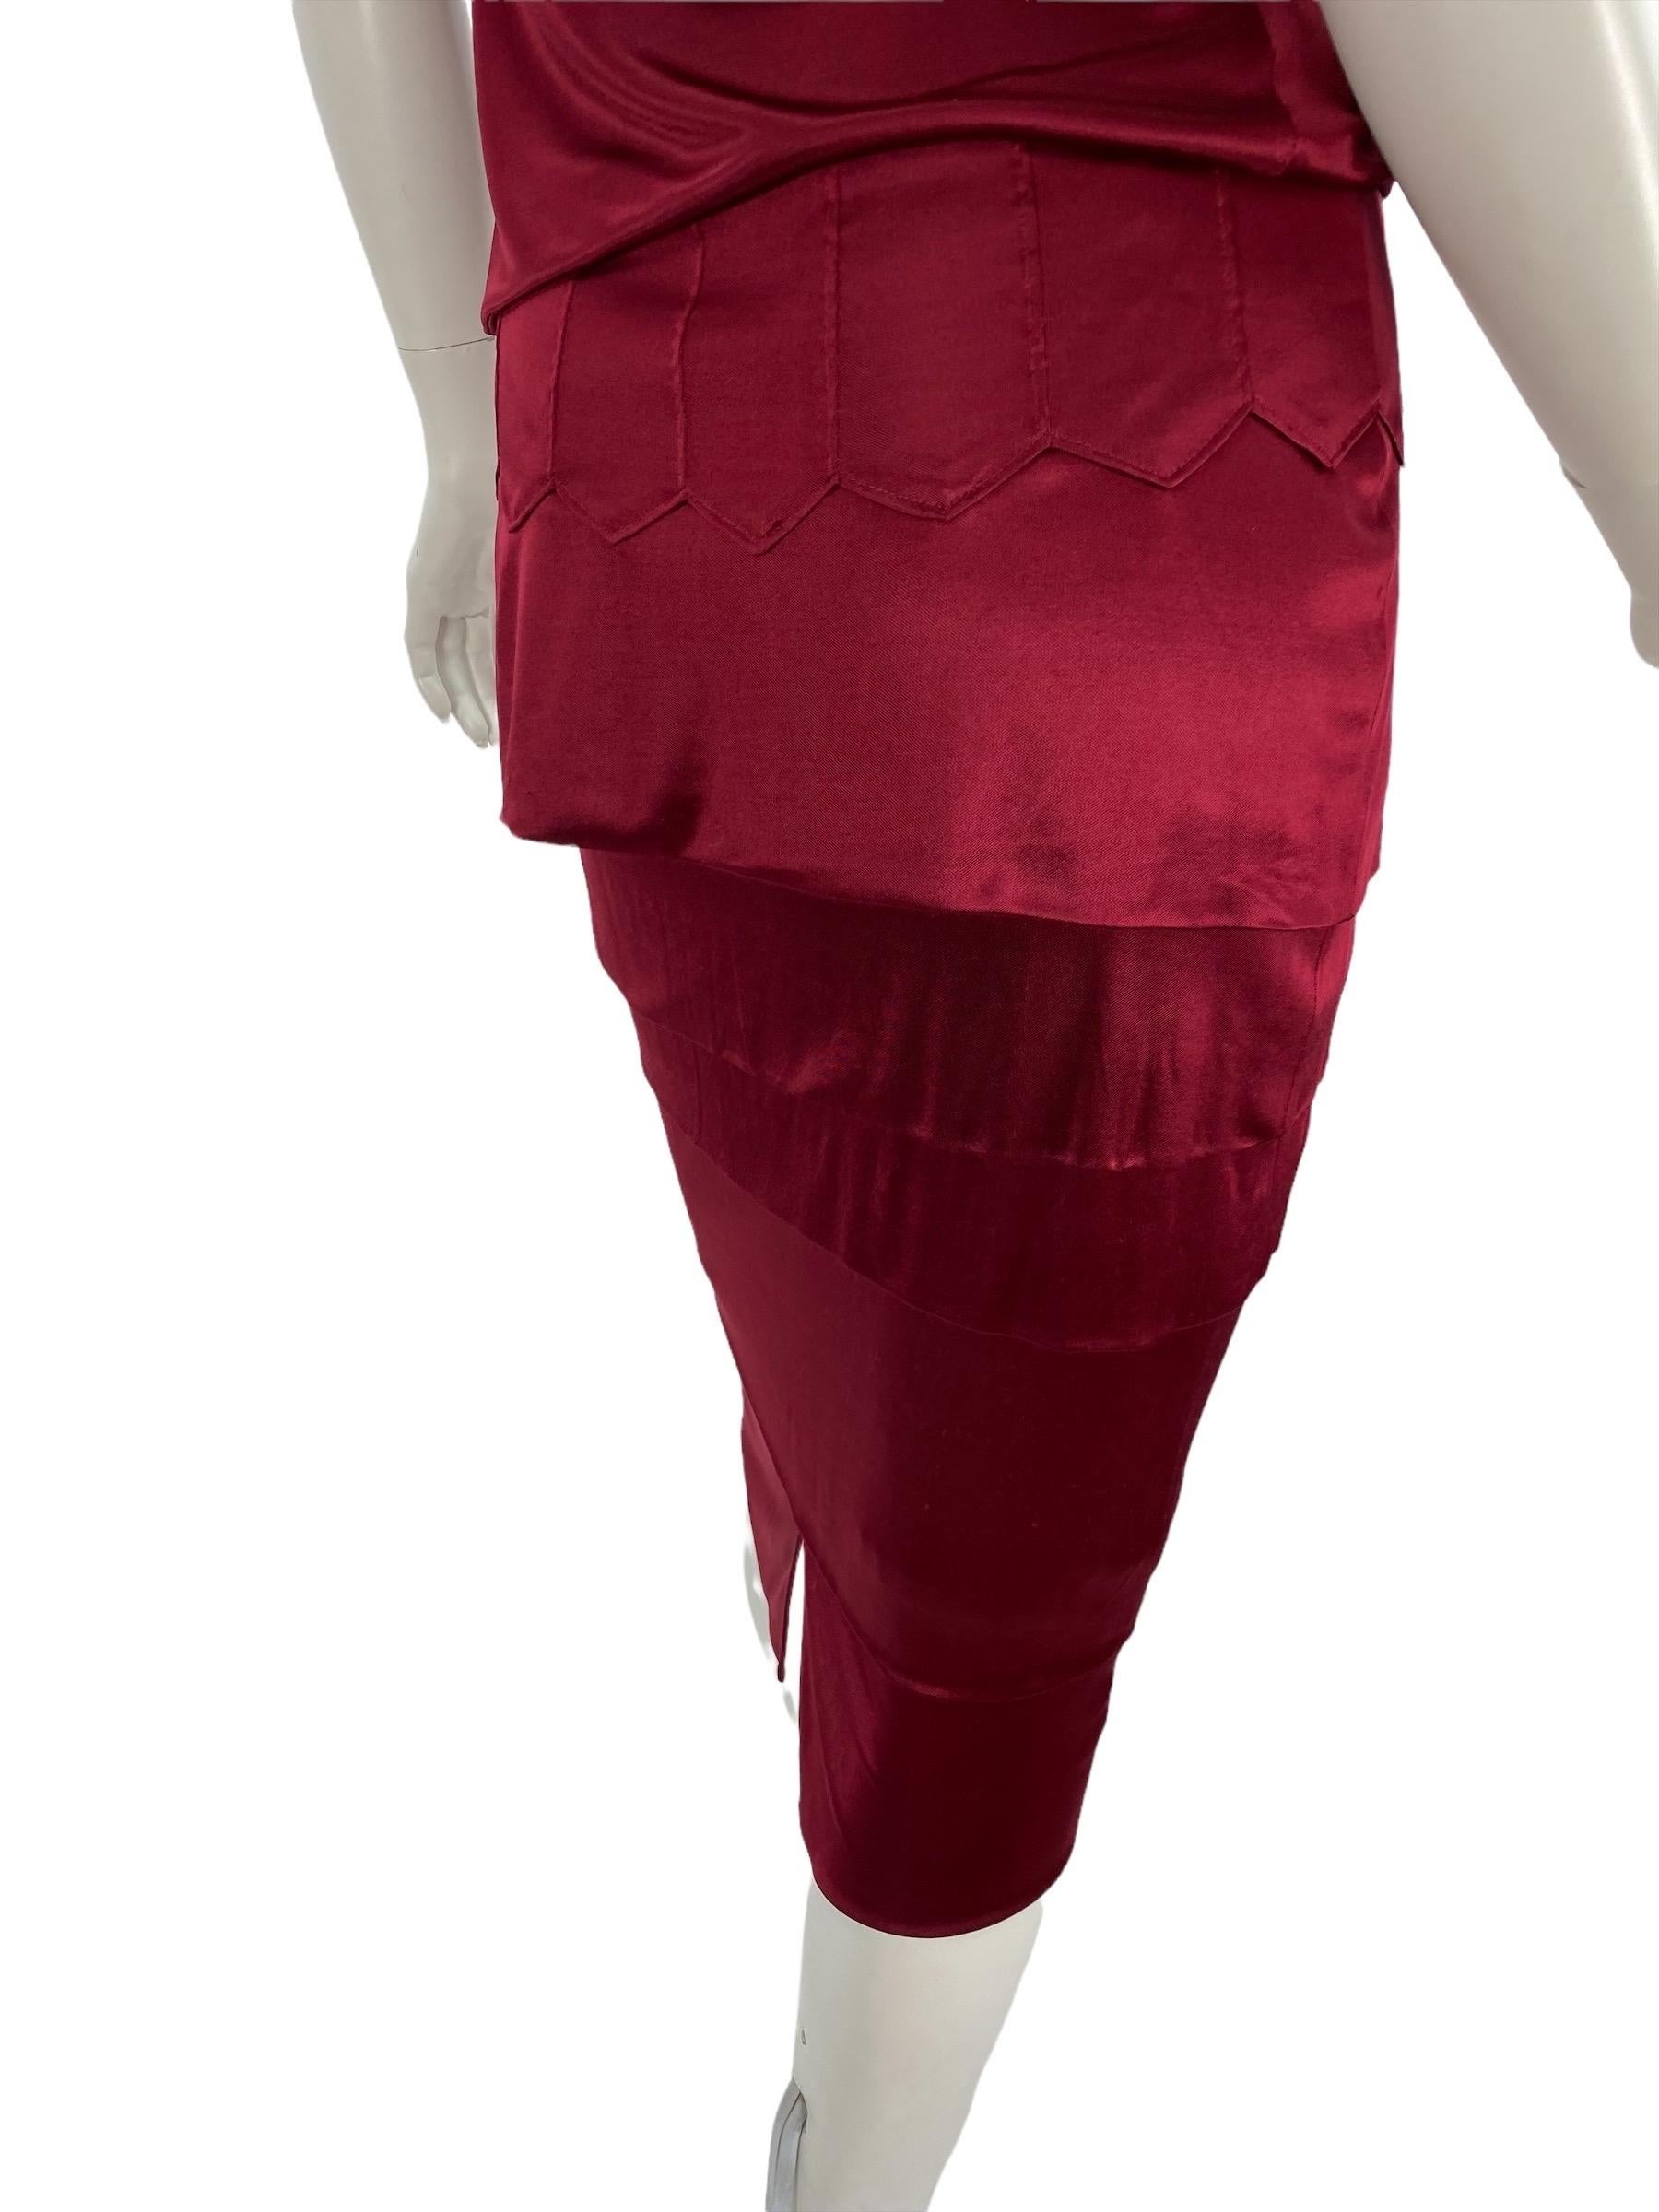 F/W 2004 Vintage Tom Ford for YSL Burgundy Red Jersey Skirt Suit Size S For Sale 1